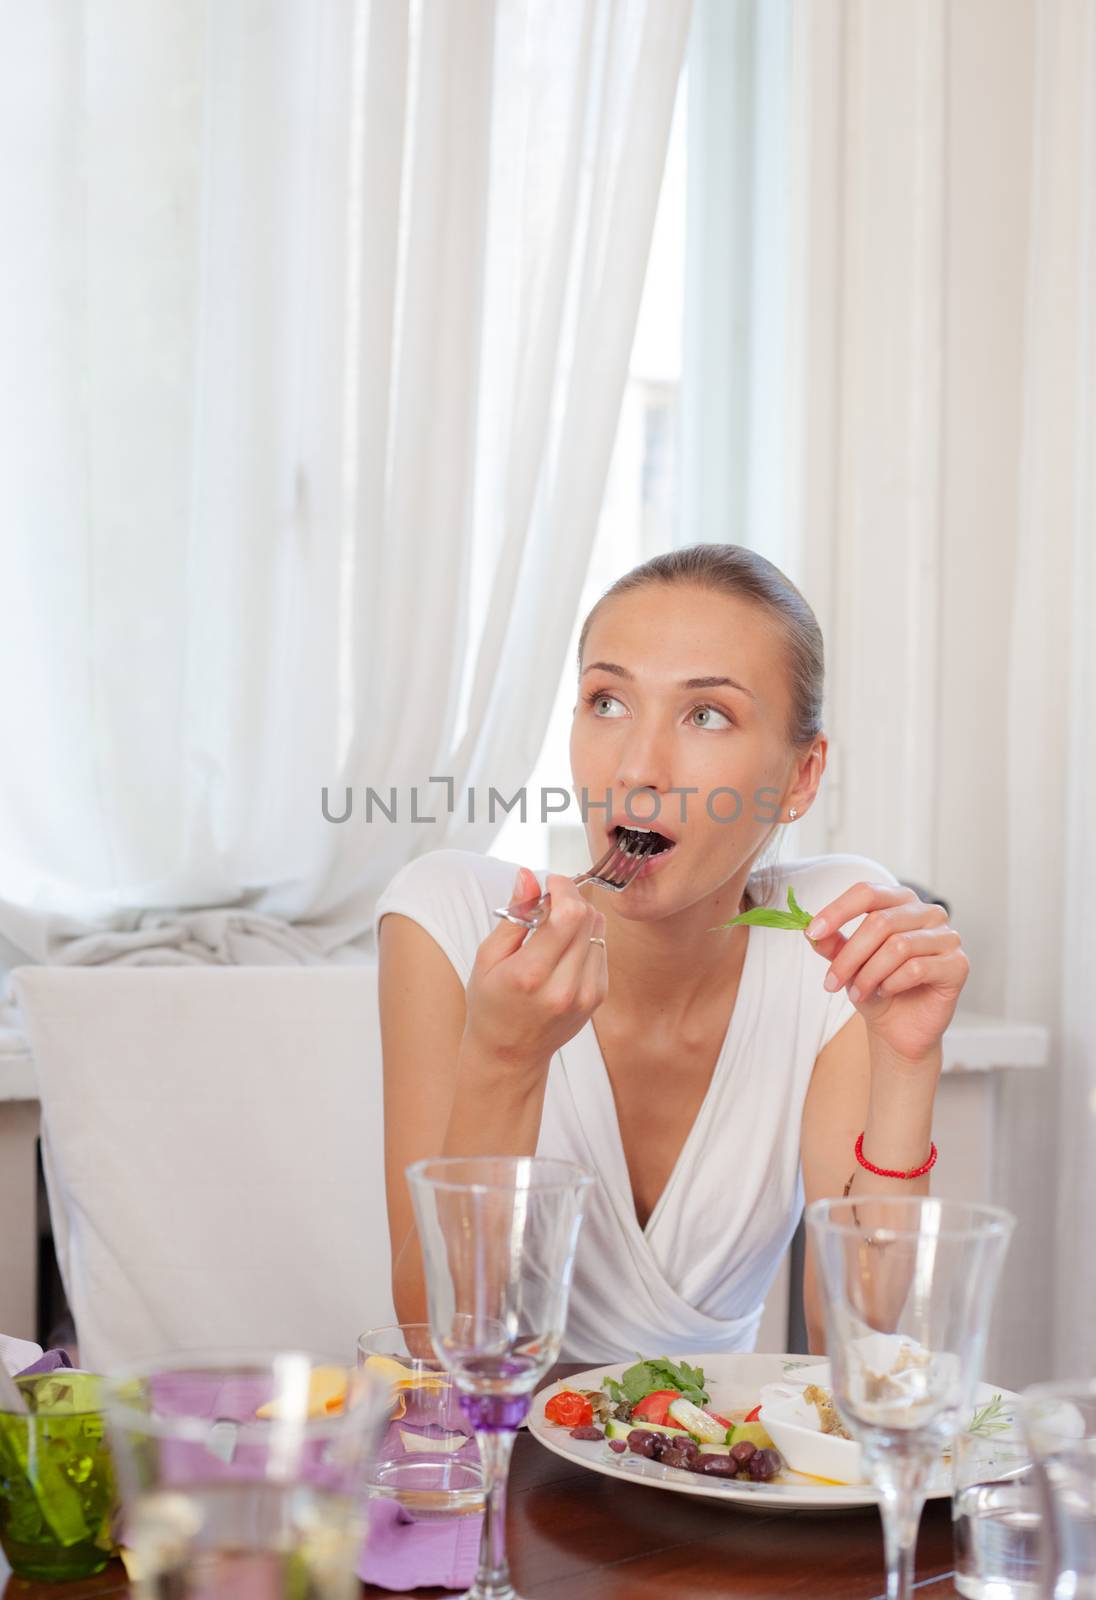 Young Female Restaurant Eating by vilevi